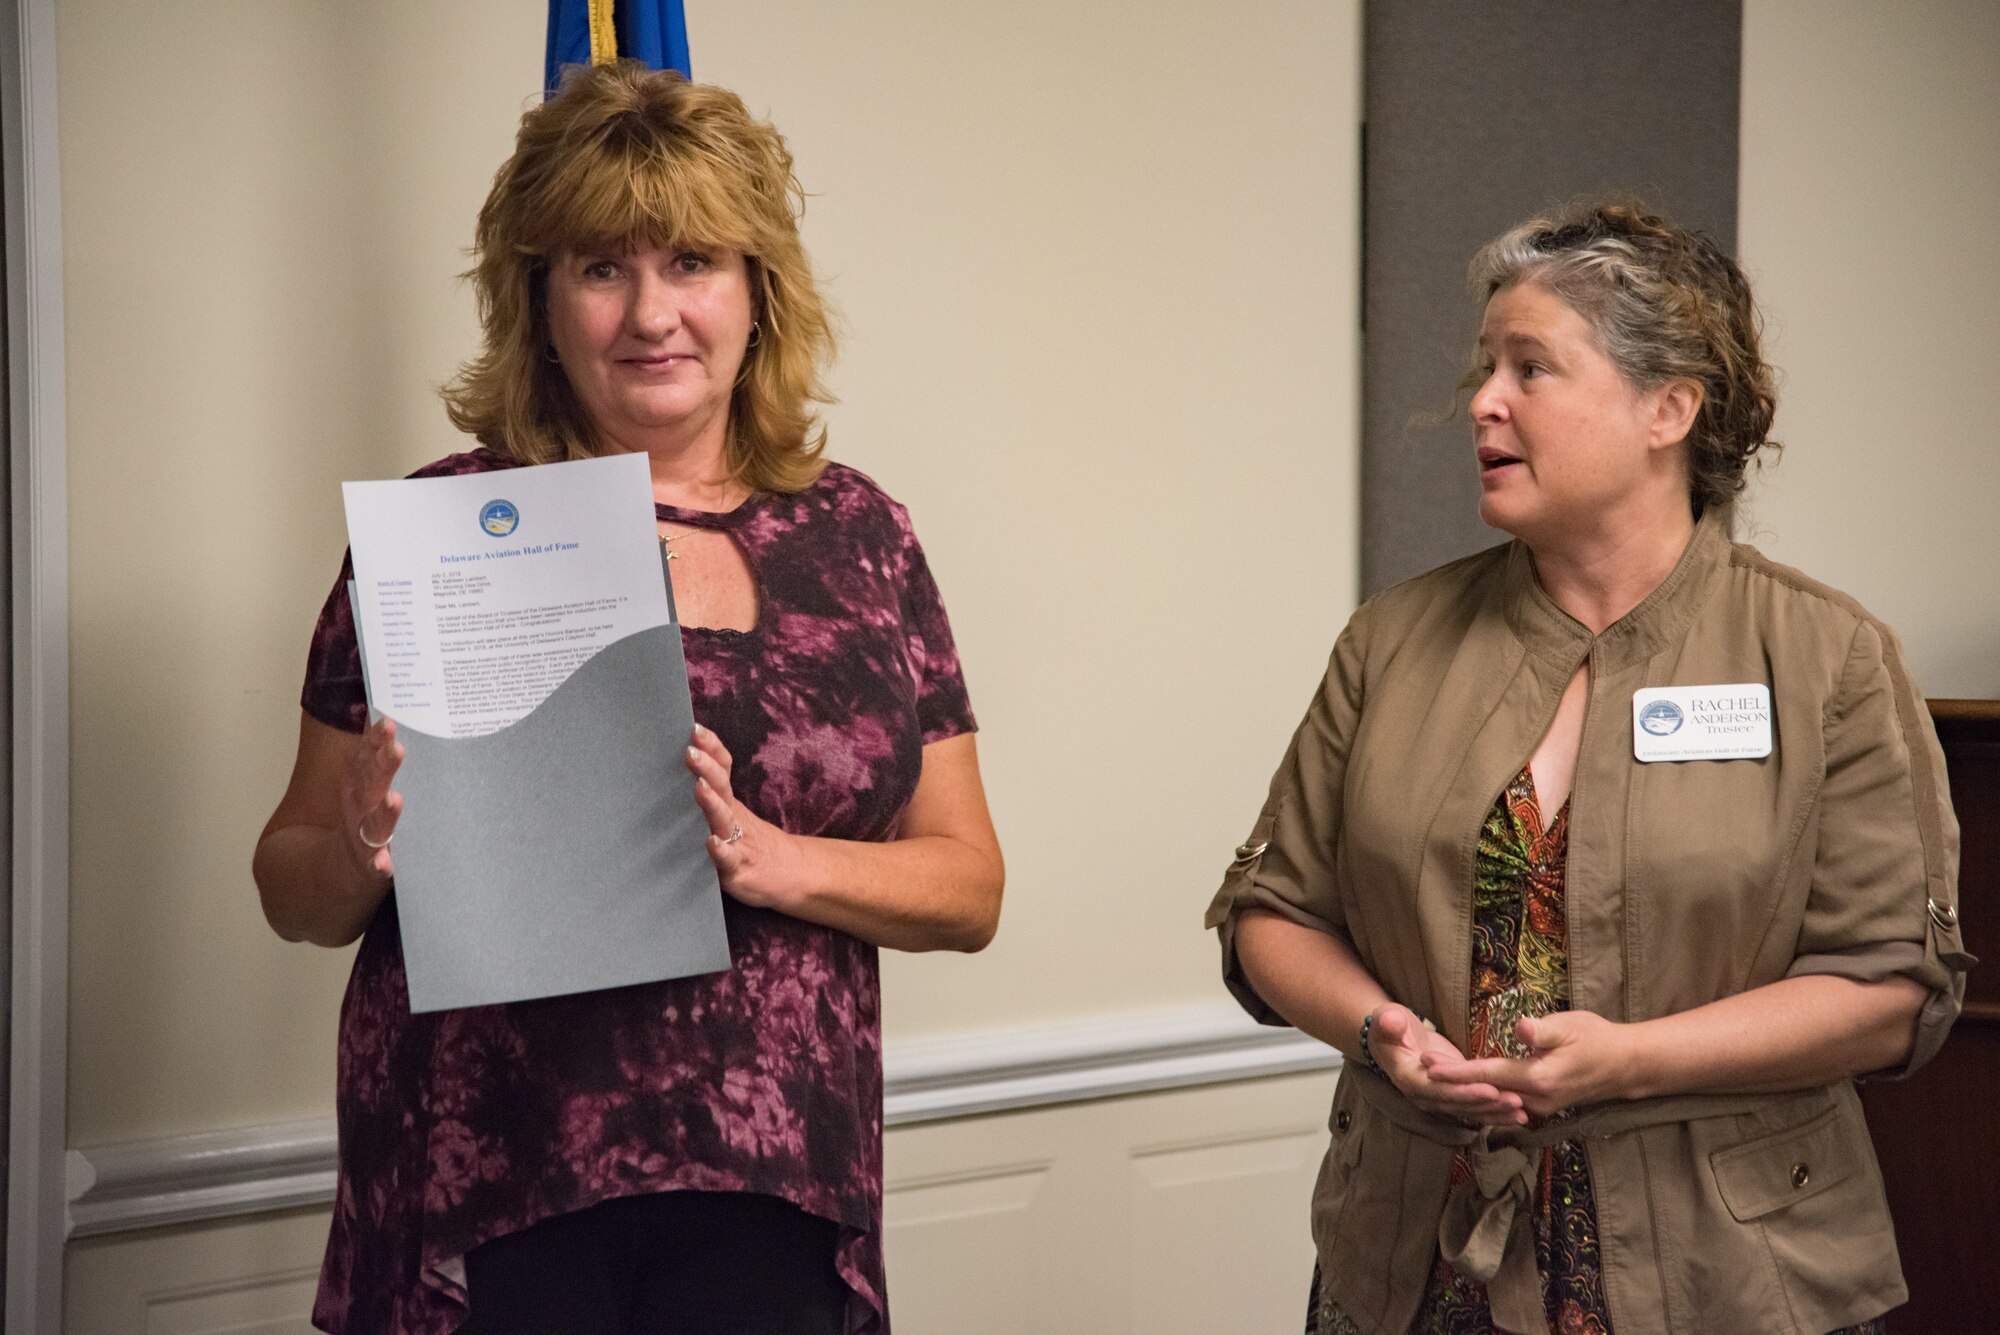 Rachel Anderson, a Delaware Aviation Hall of Fame trustee, right, speaks to retired Senior Master Sgt. Kathleen Lambert, a former 512th Airlift Wing loadmaster, left, during a Delaware Aviation Hall of Fame inductee notification at Dover Air Force Base, Del., Aug. 3, 2018. The Delaware Aviation Hall of Fame selected Lambert as an honoree for her accomplishments as a 512th AW flyer. (U.S. Air Force photo by Staff Sgt. Damien Taylor)